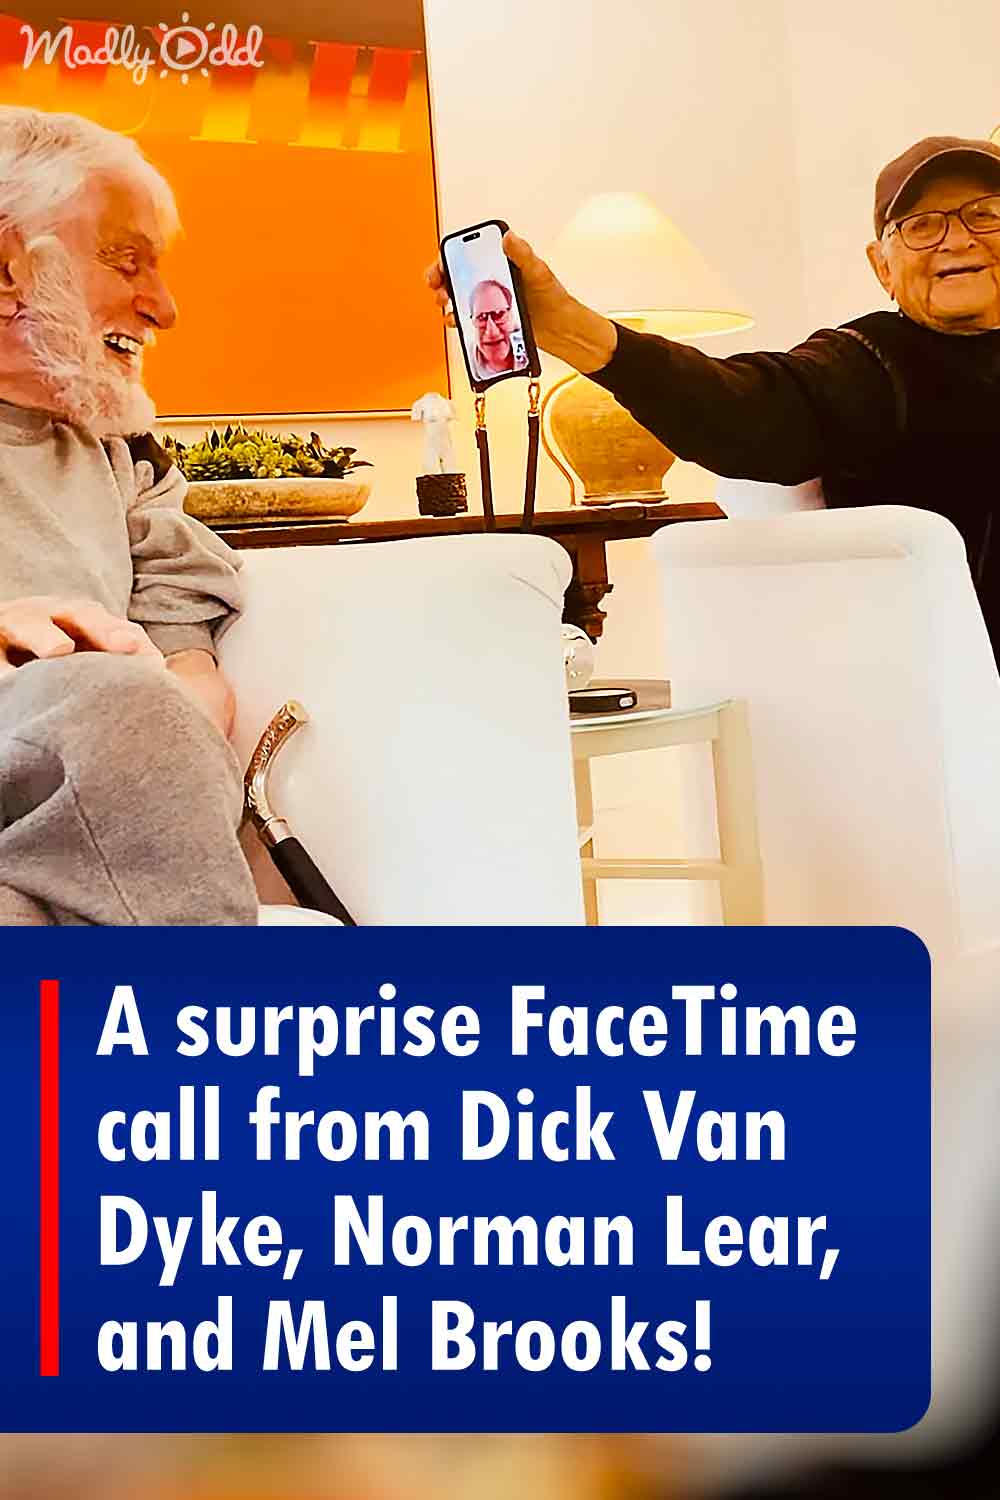 A surprise FaceTime call from Dick Van Dyke, Norman Lear, and Mel Brooks!